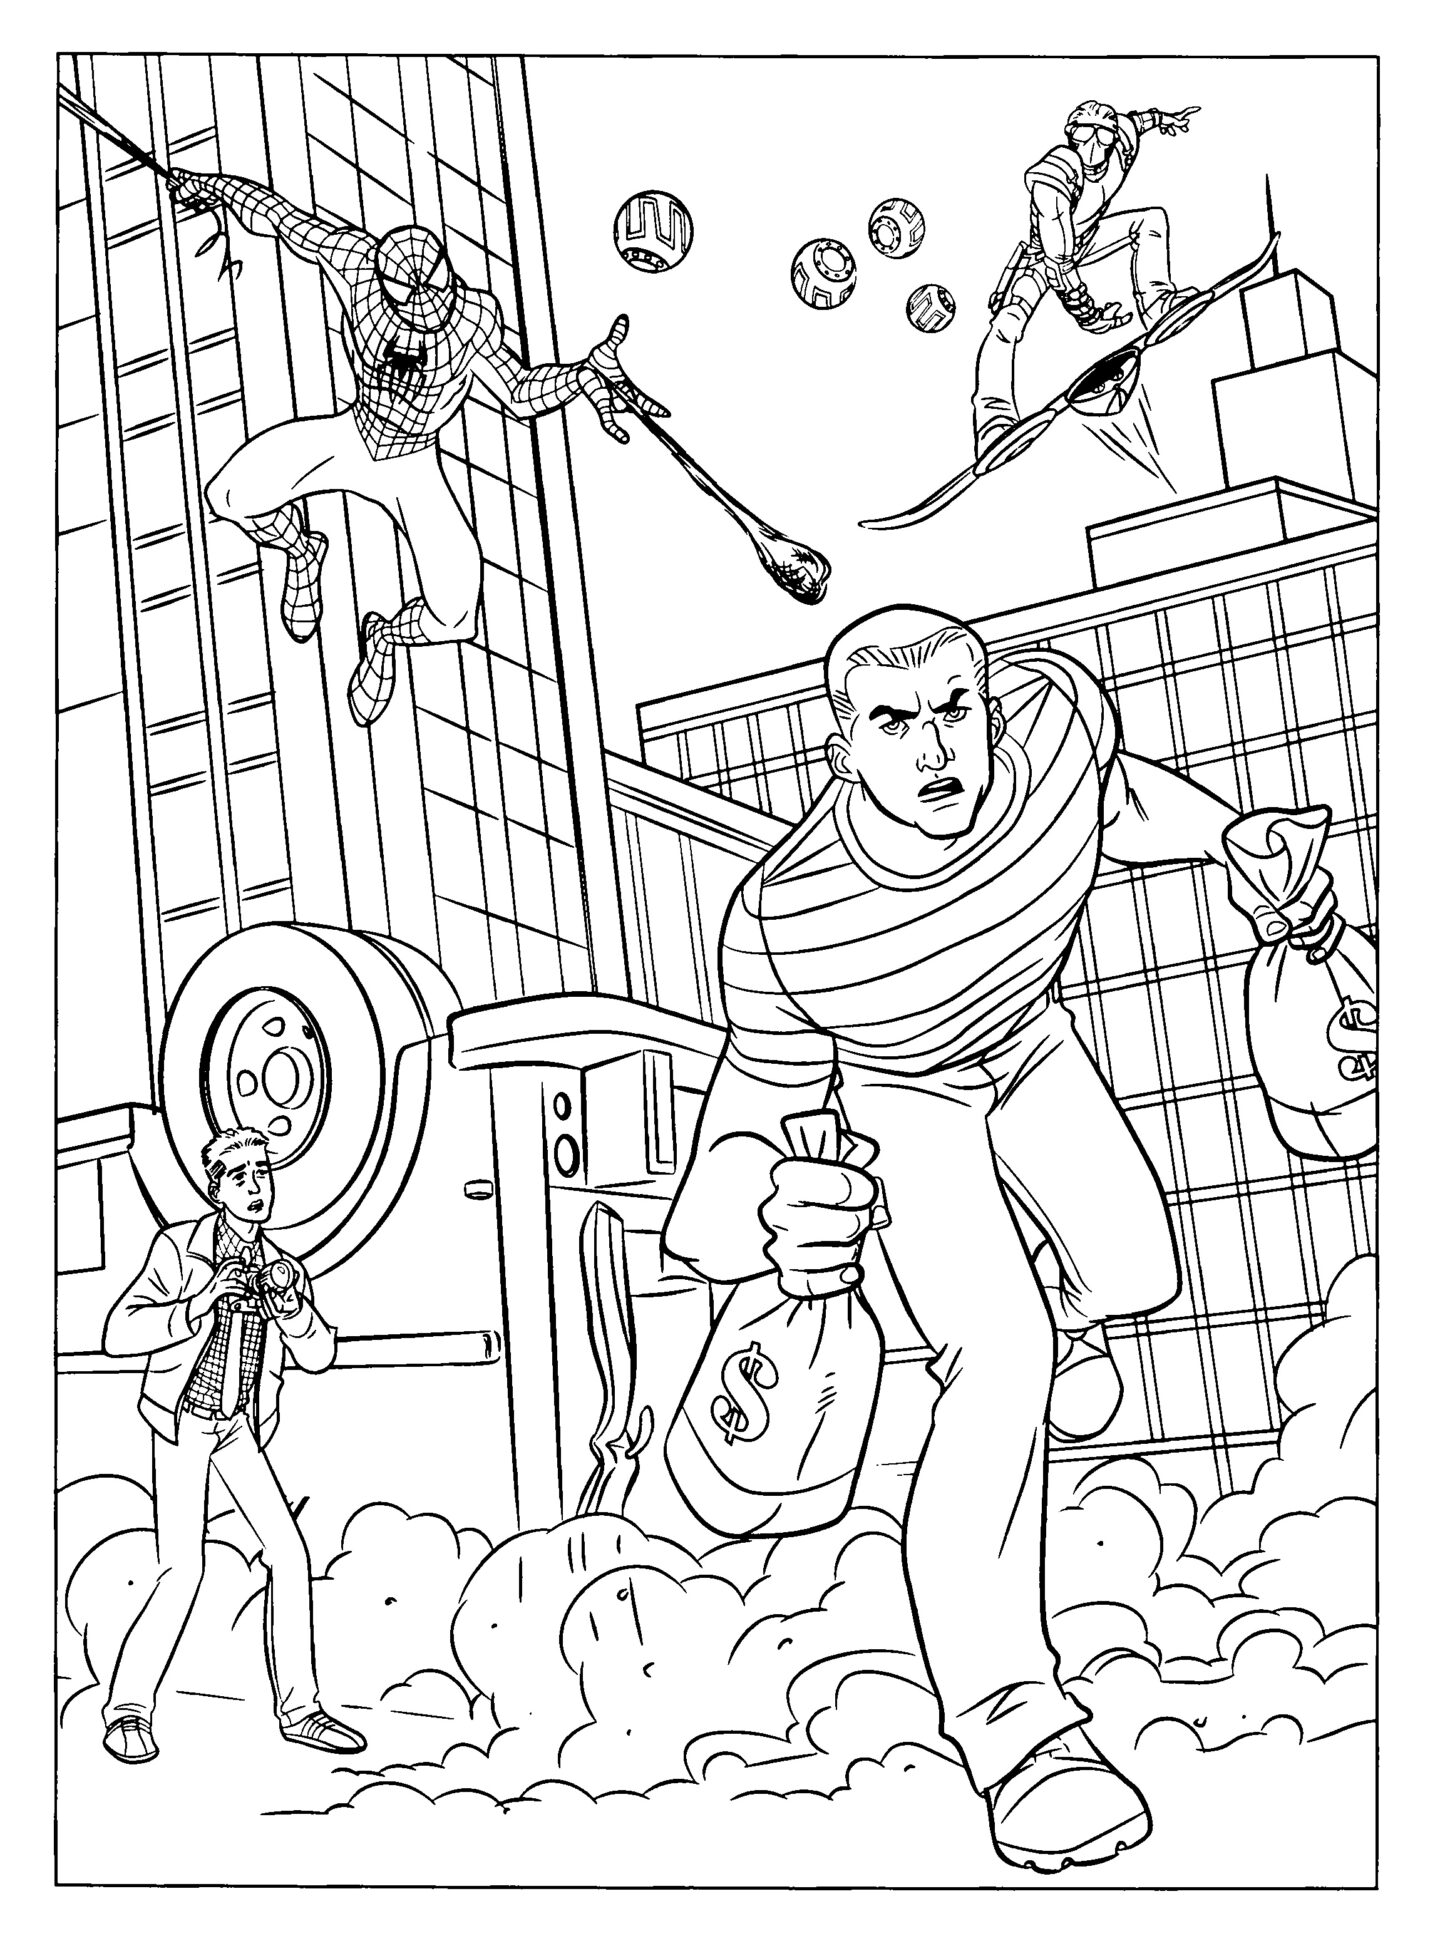 Best spiderman coloring pages